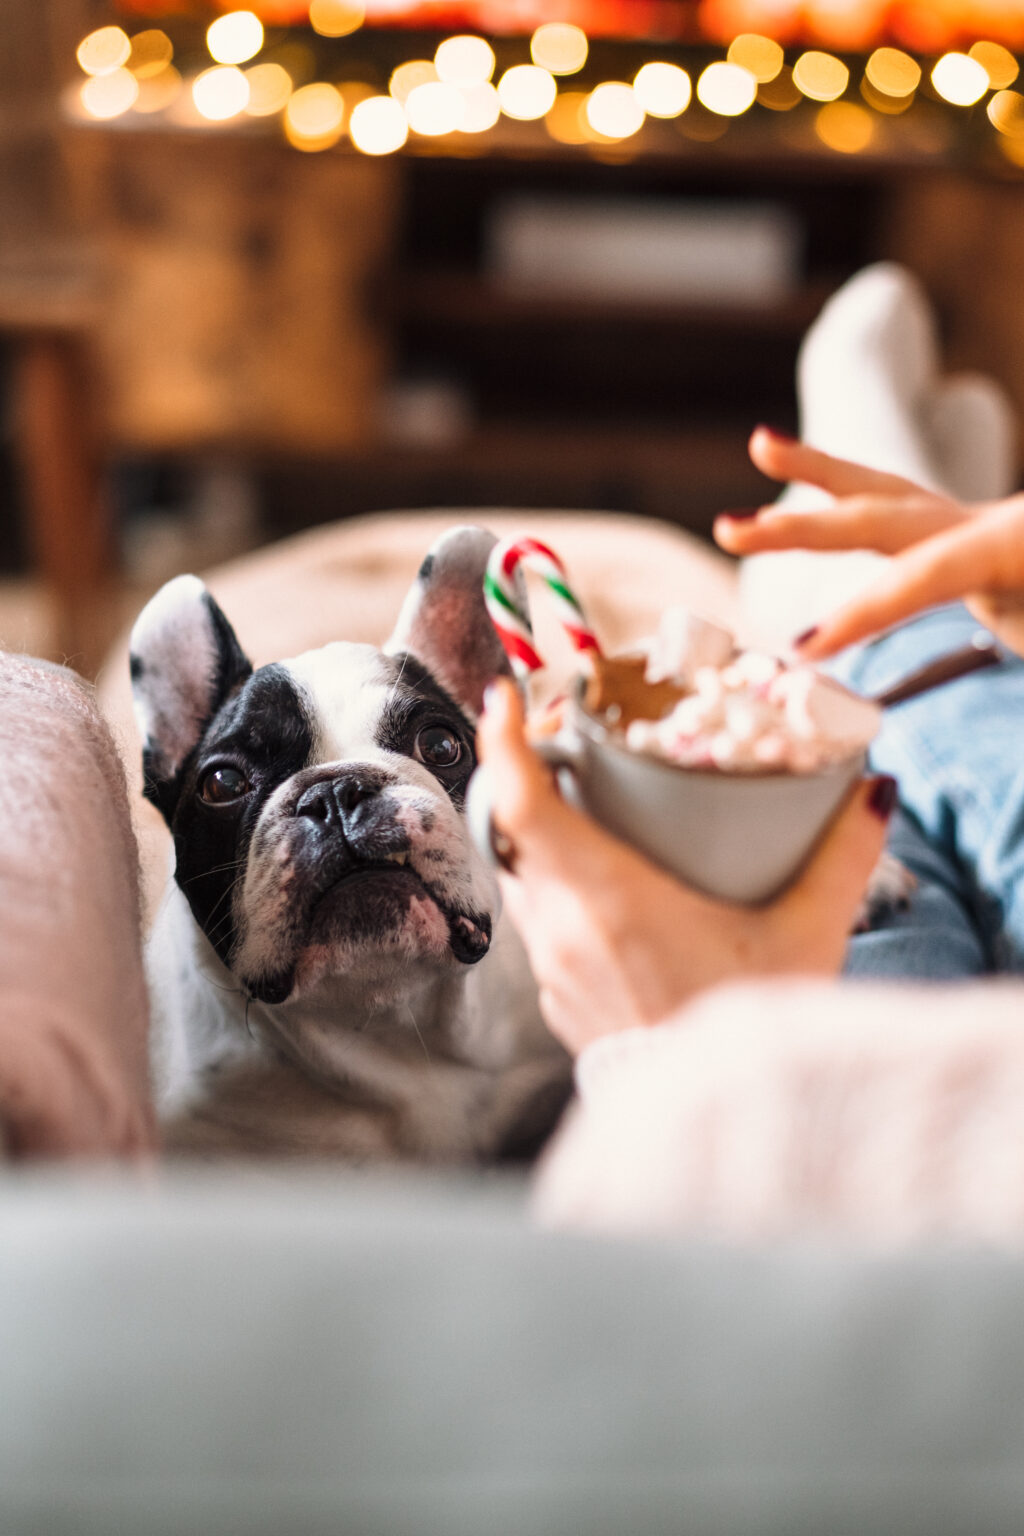 French Bulldog trying to steal Christmas latte with marshmallows 4 - free stock photo